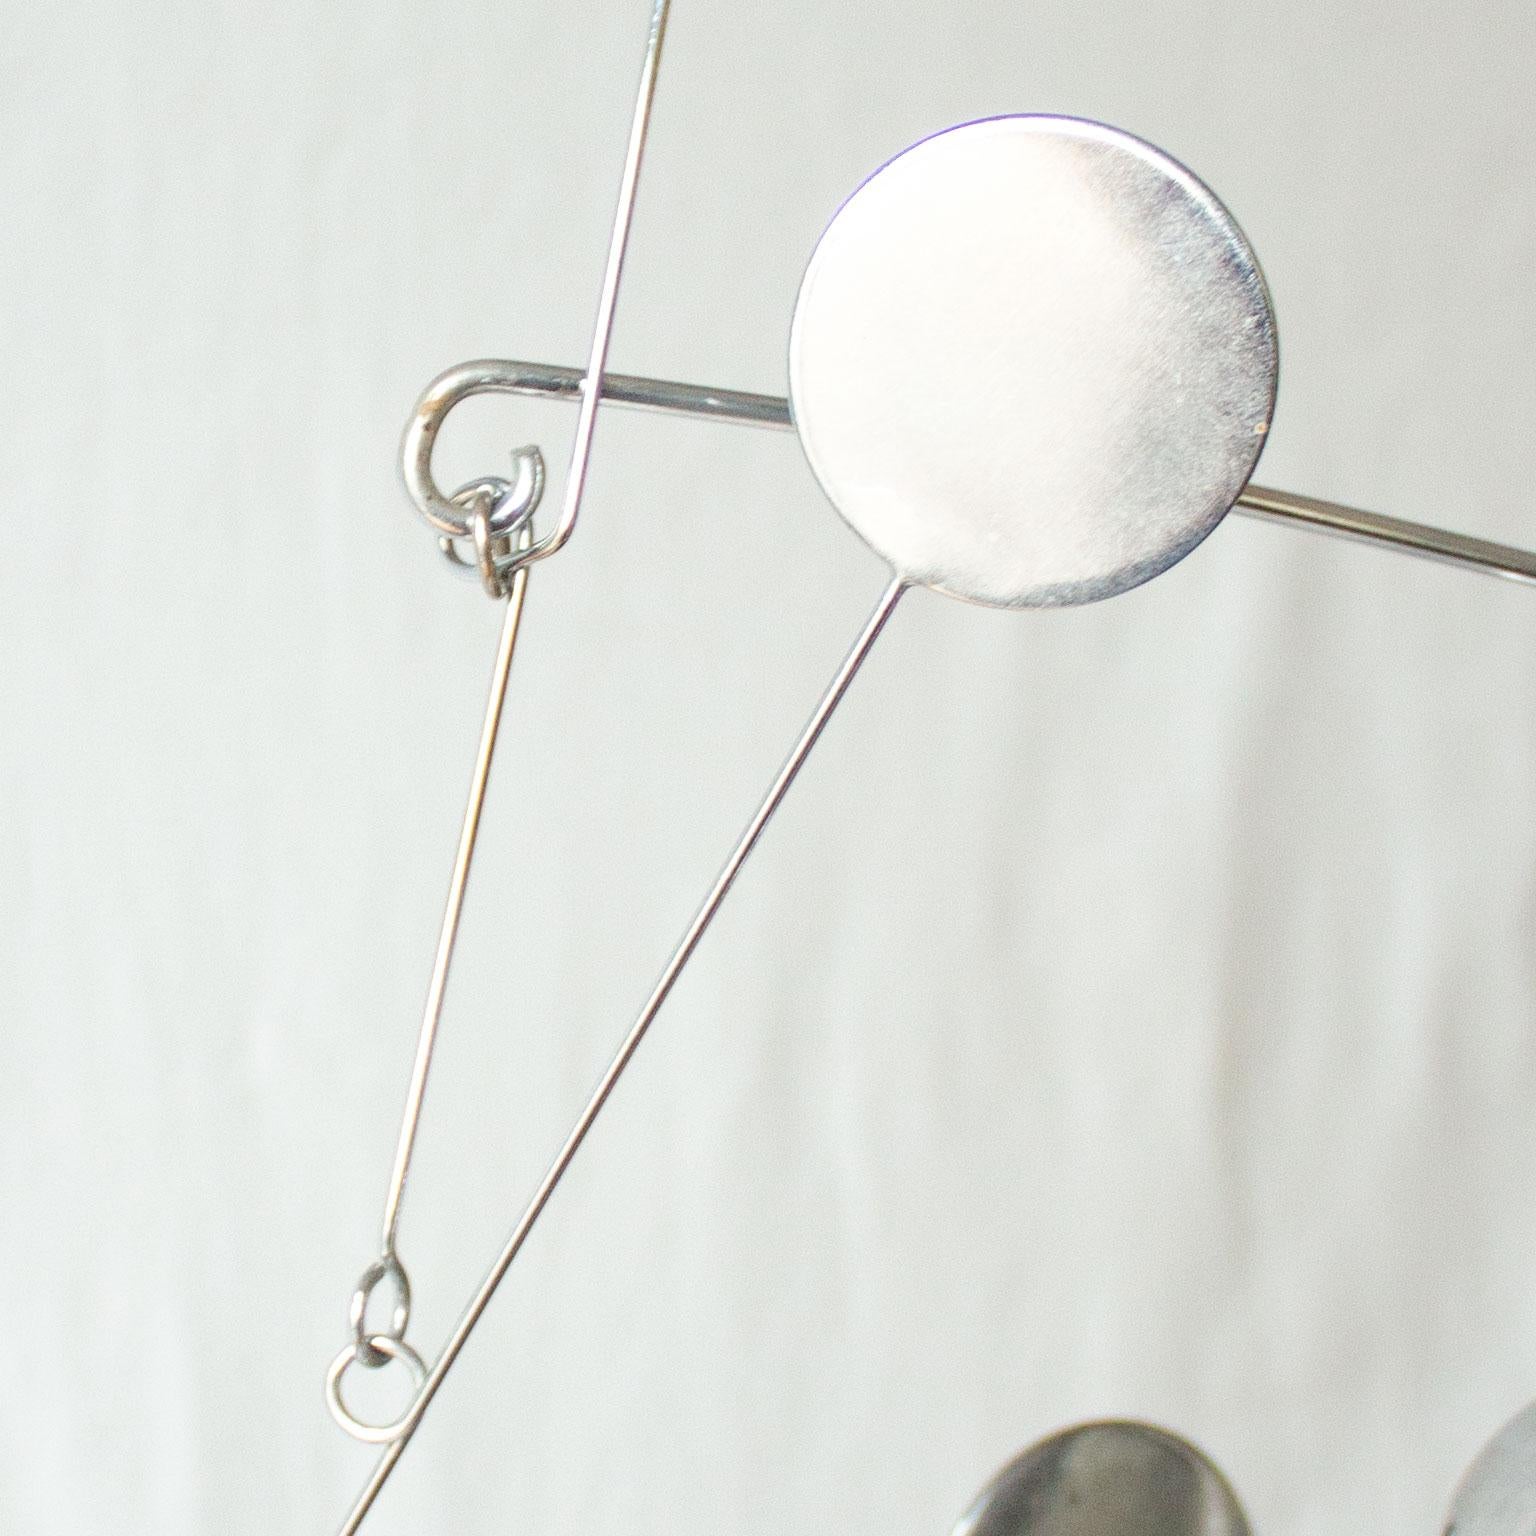 Late 20th Century Kinetic Stabile Mobile Sculpture Signed by Francois Collette from 1976